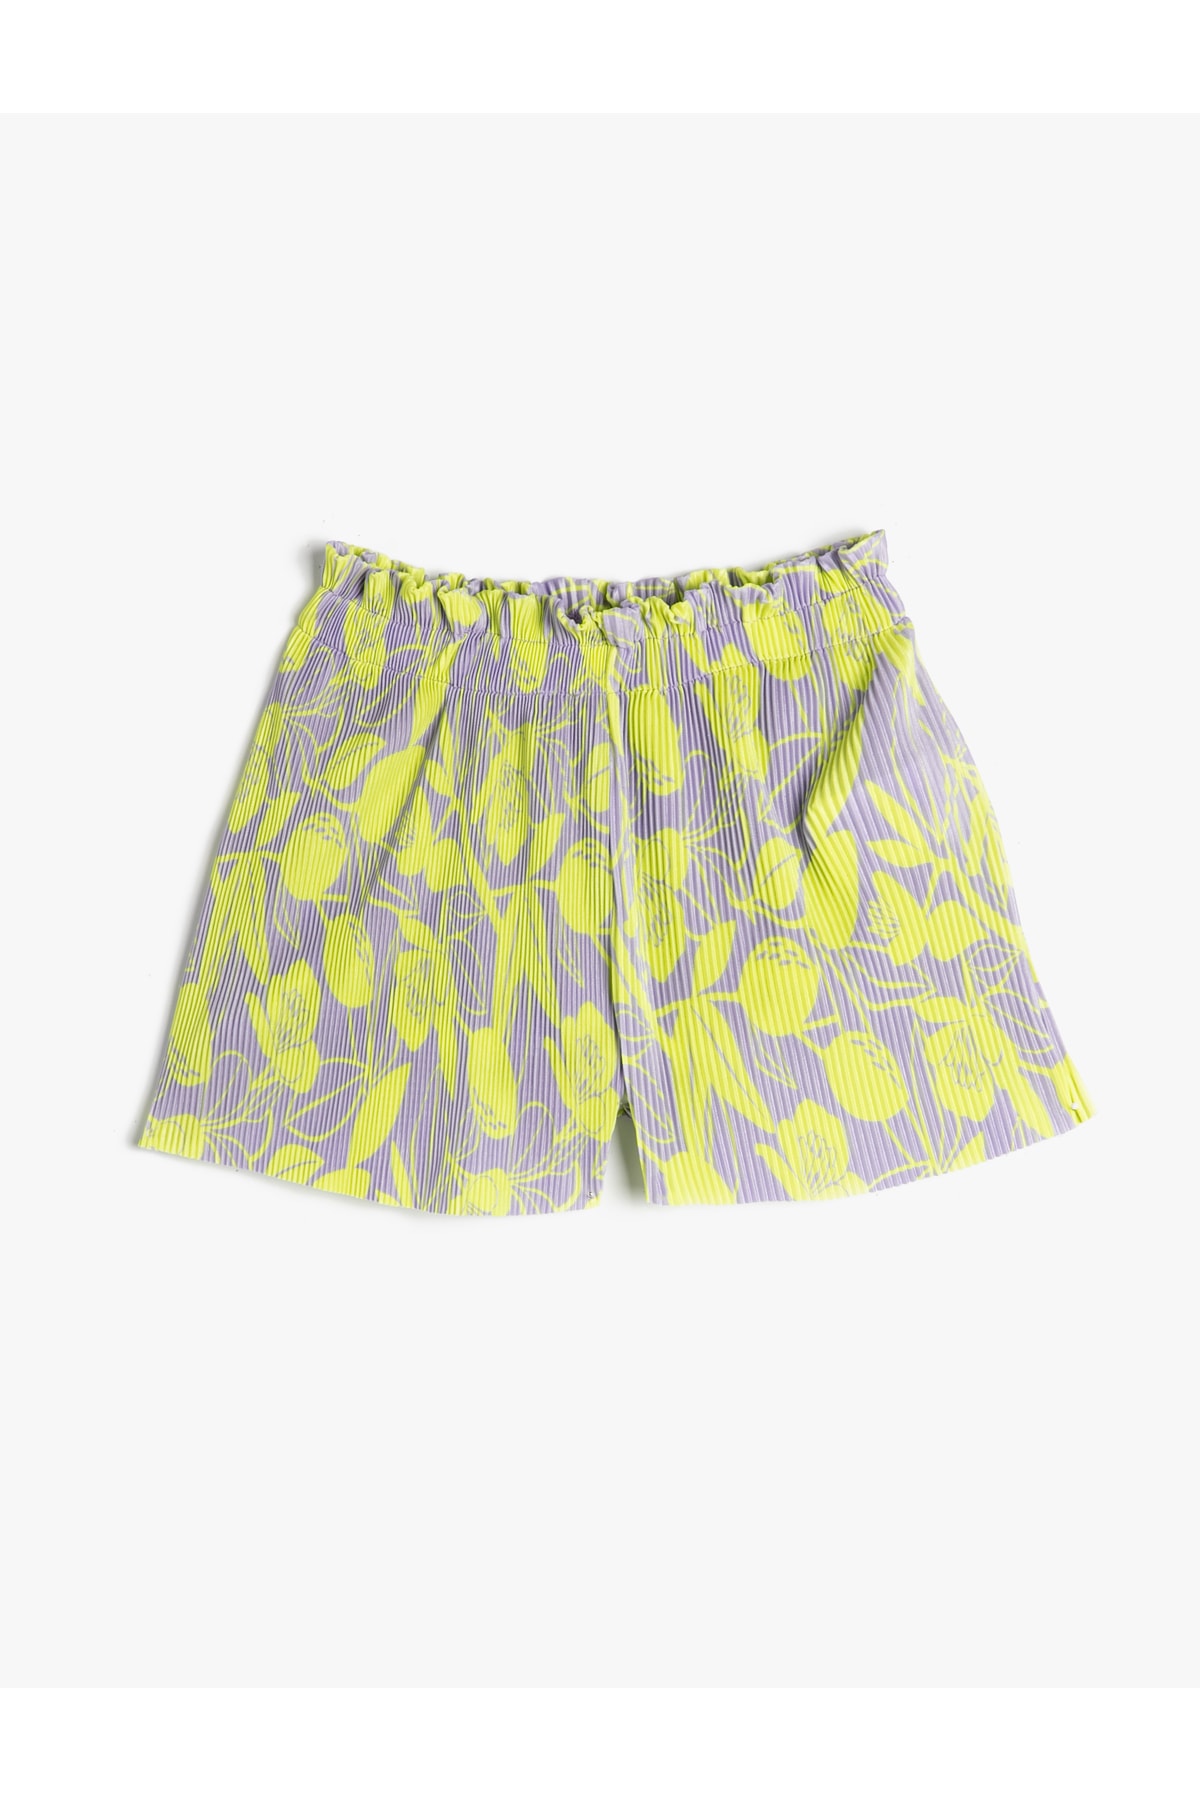 Levně Koton Pleated Shorts With Elastic Waist, Floral Pattern Relaxed Cut.